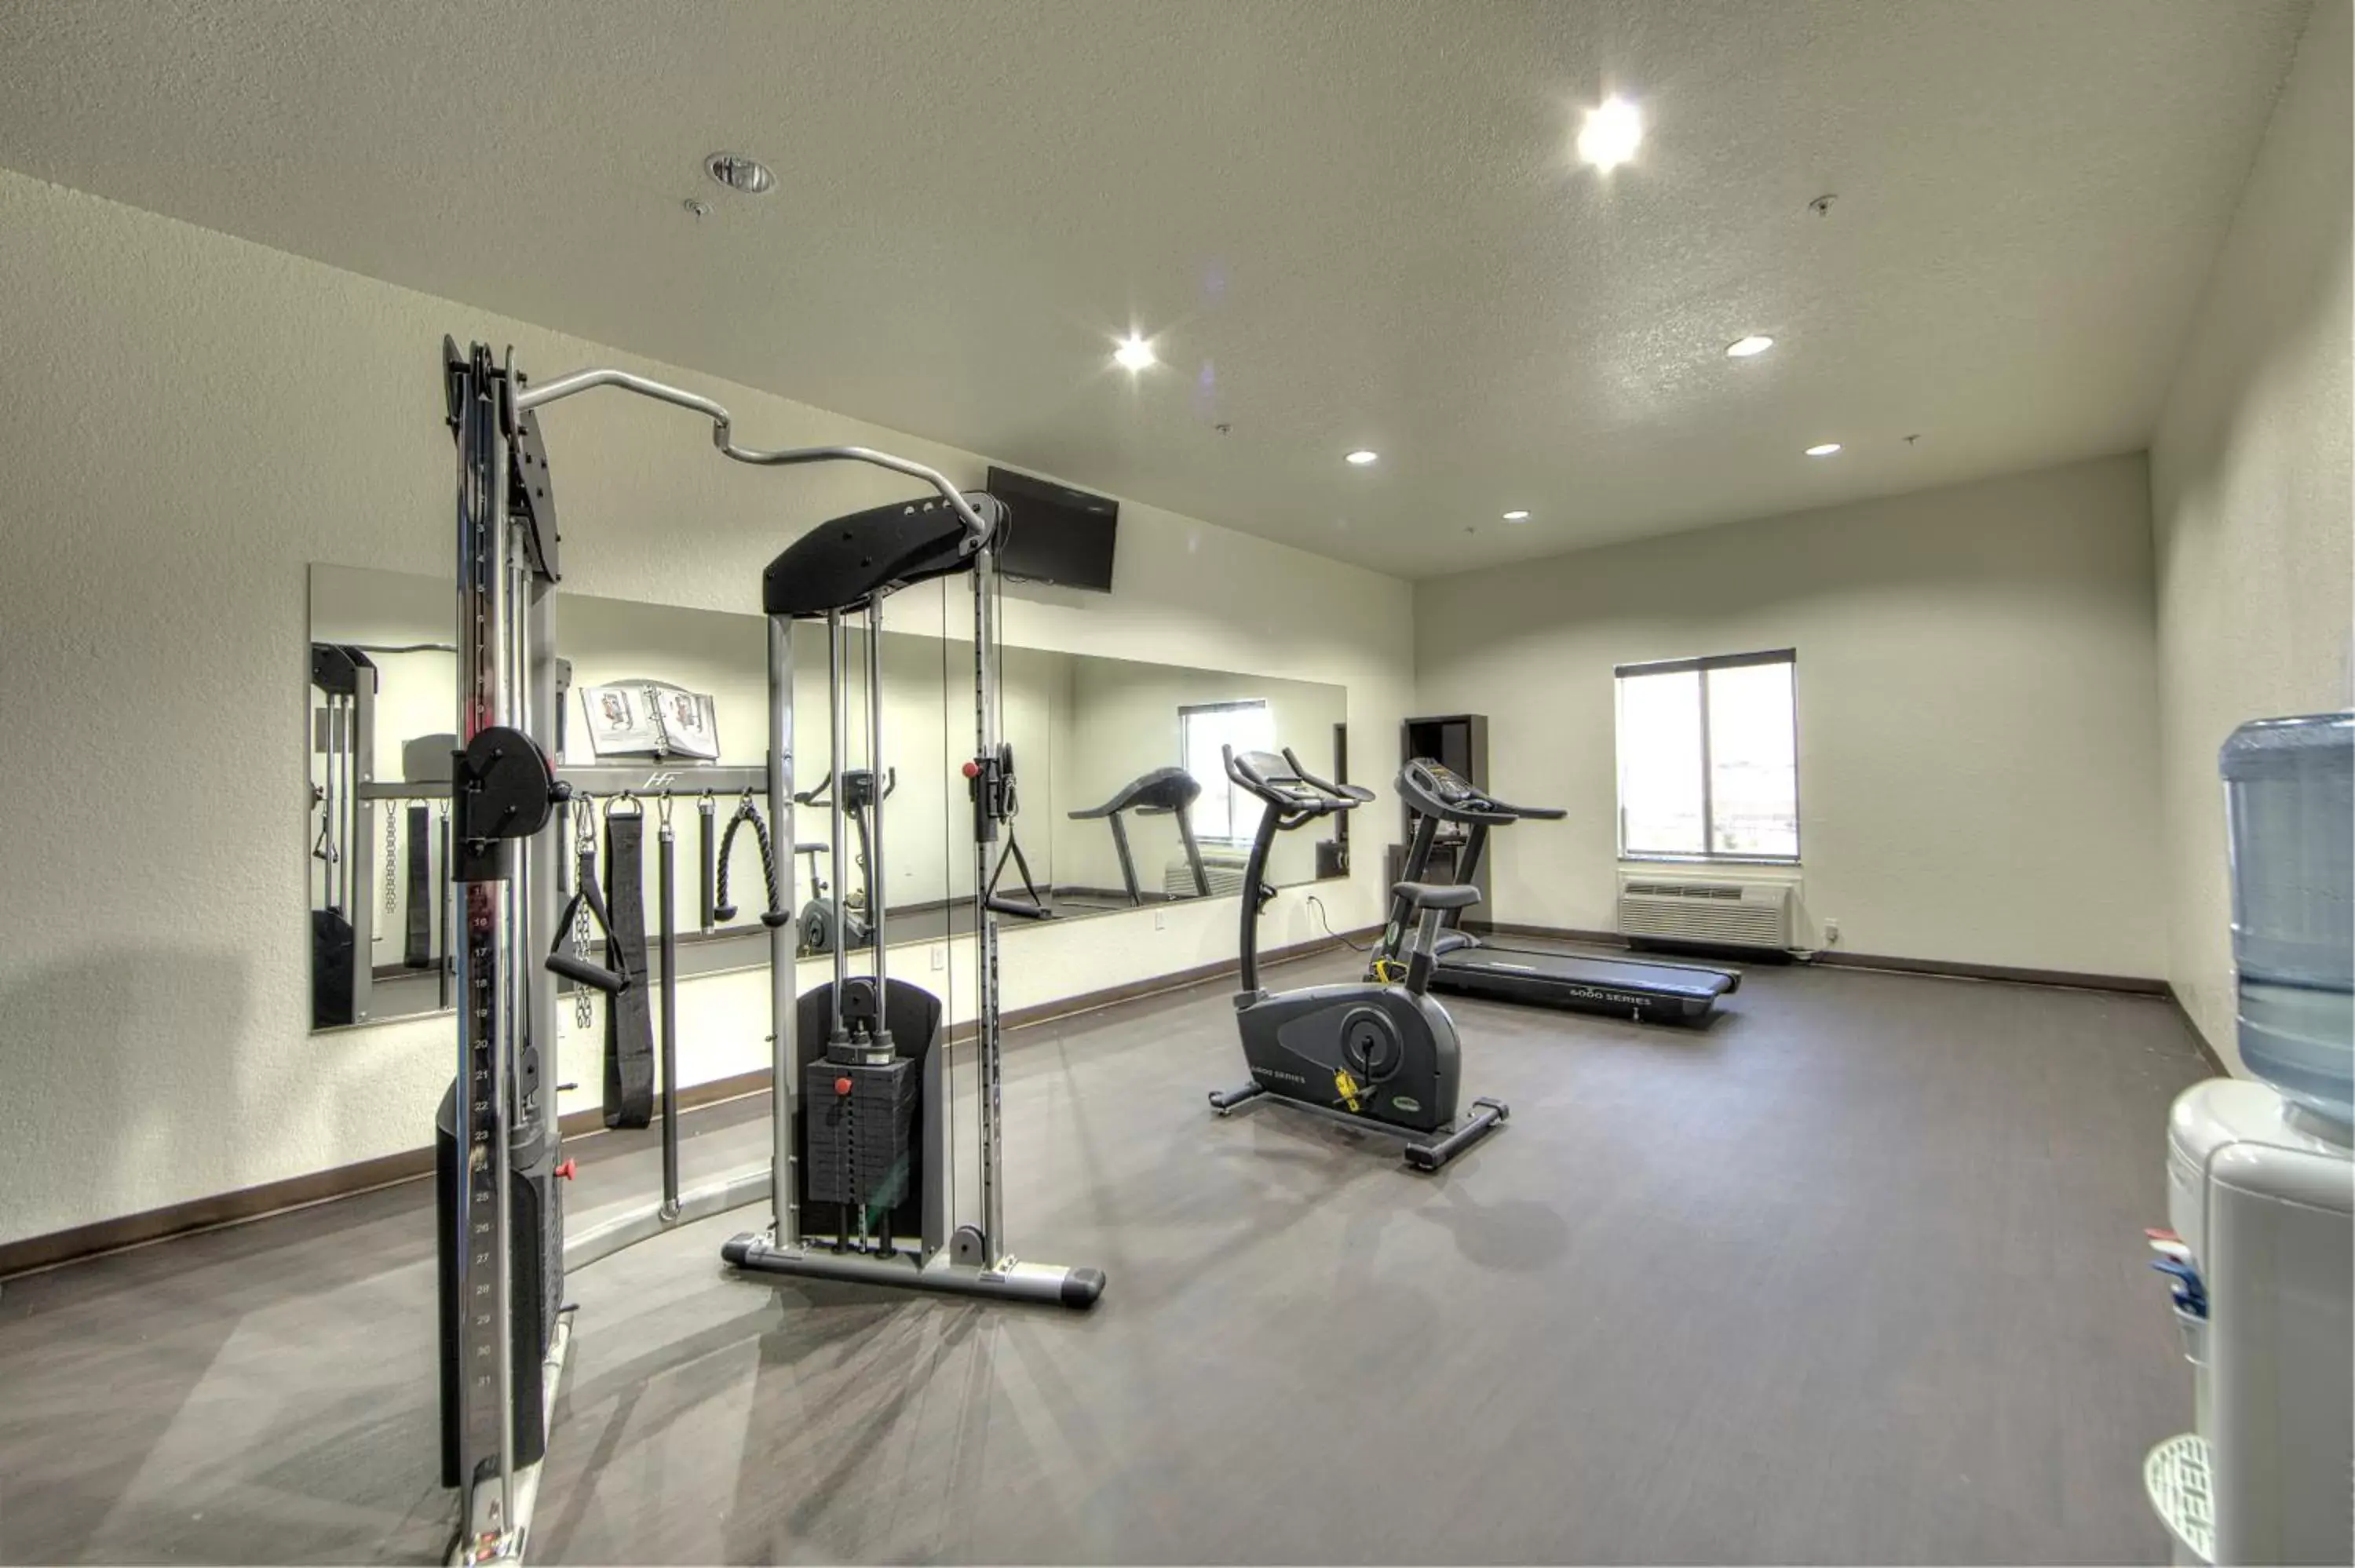 Fitness centre/facilities, Fitness Center/Facilities in Comfort Inn & Suites, White Settlement-Fort Worth West, TX